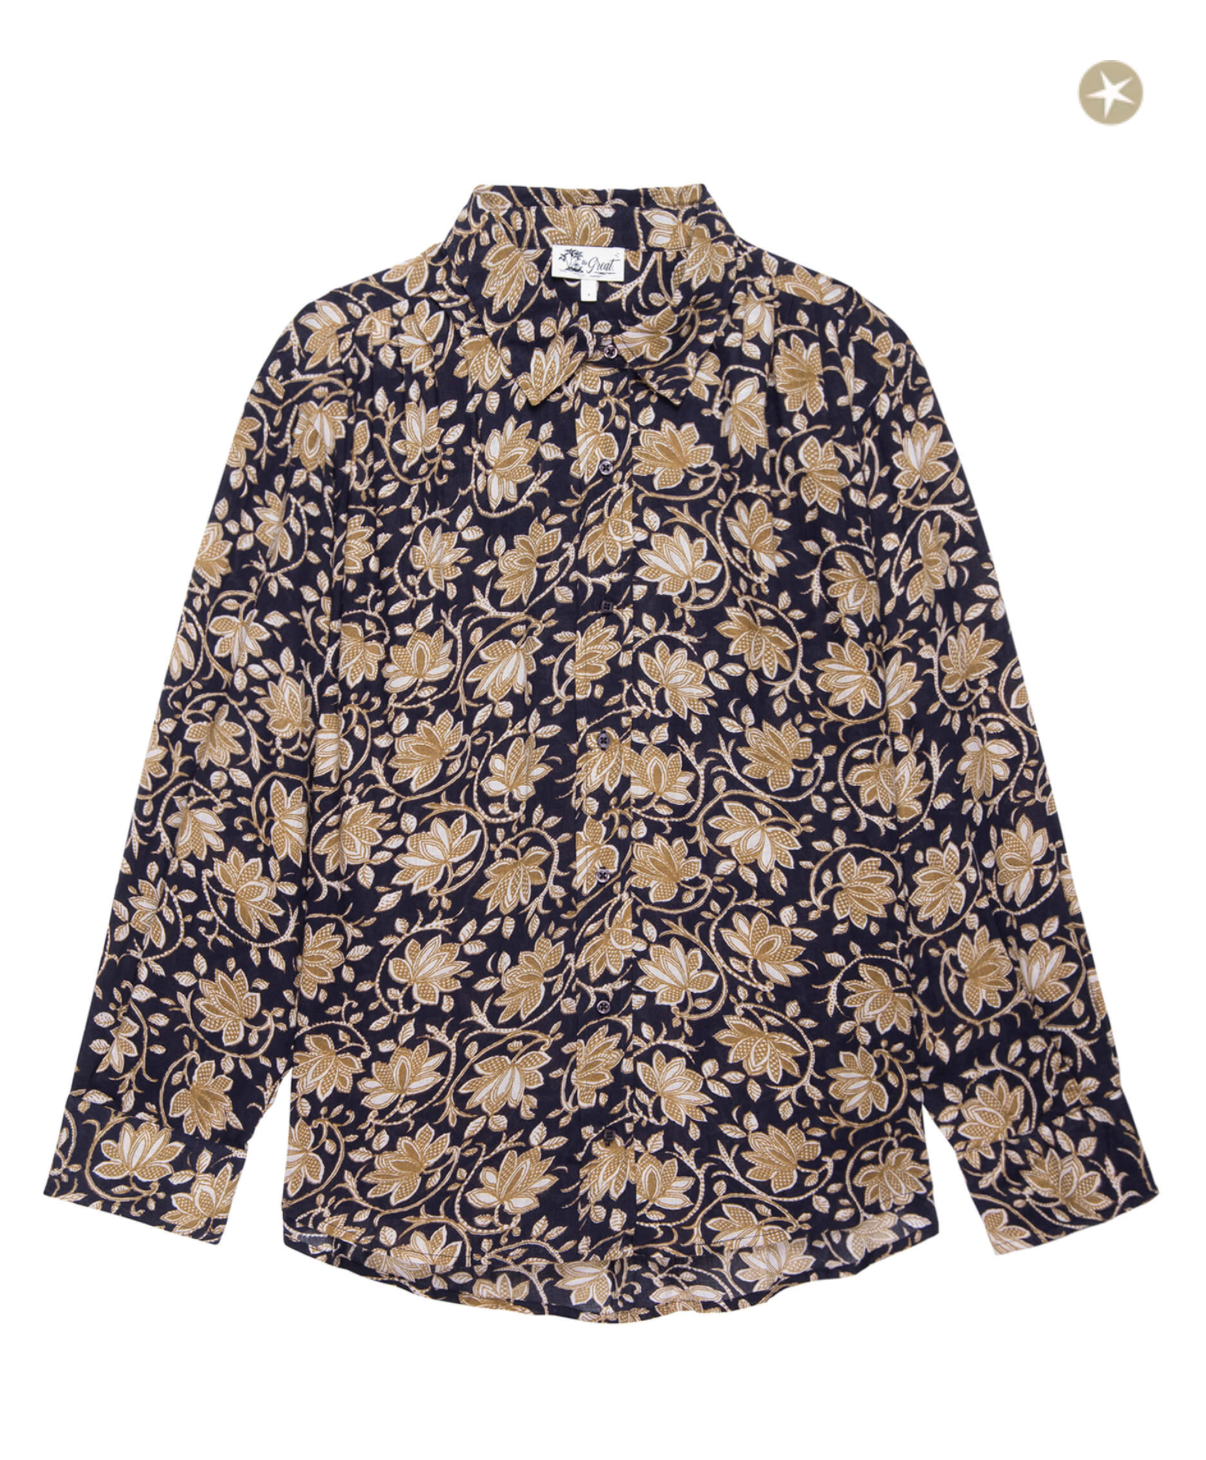 The Cove Shirt. Black Oasis Floral